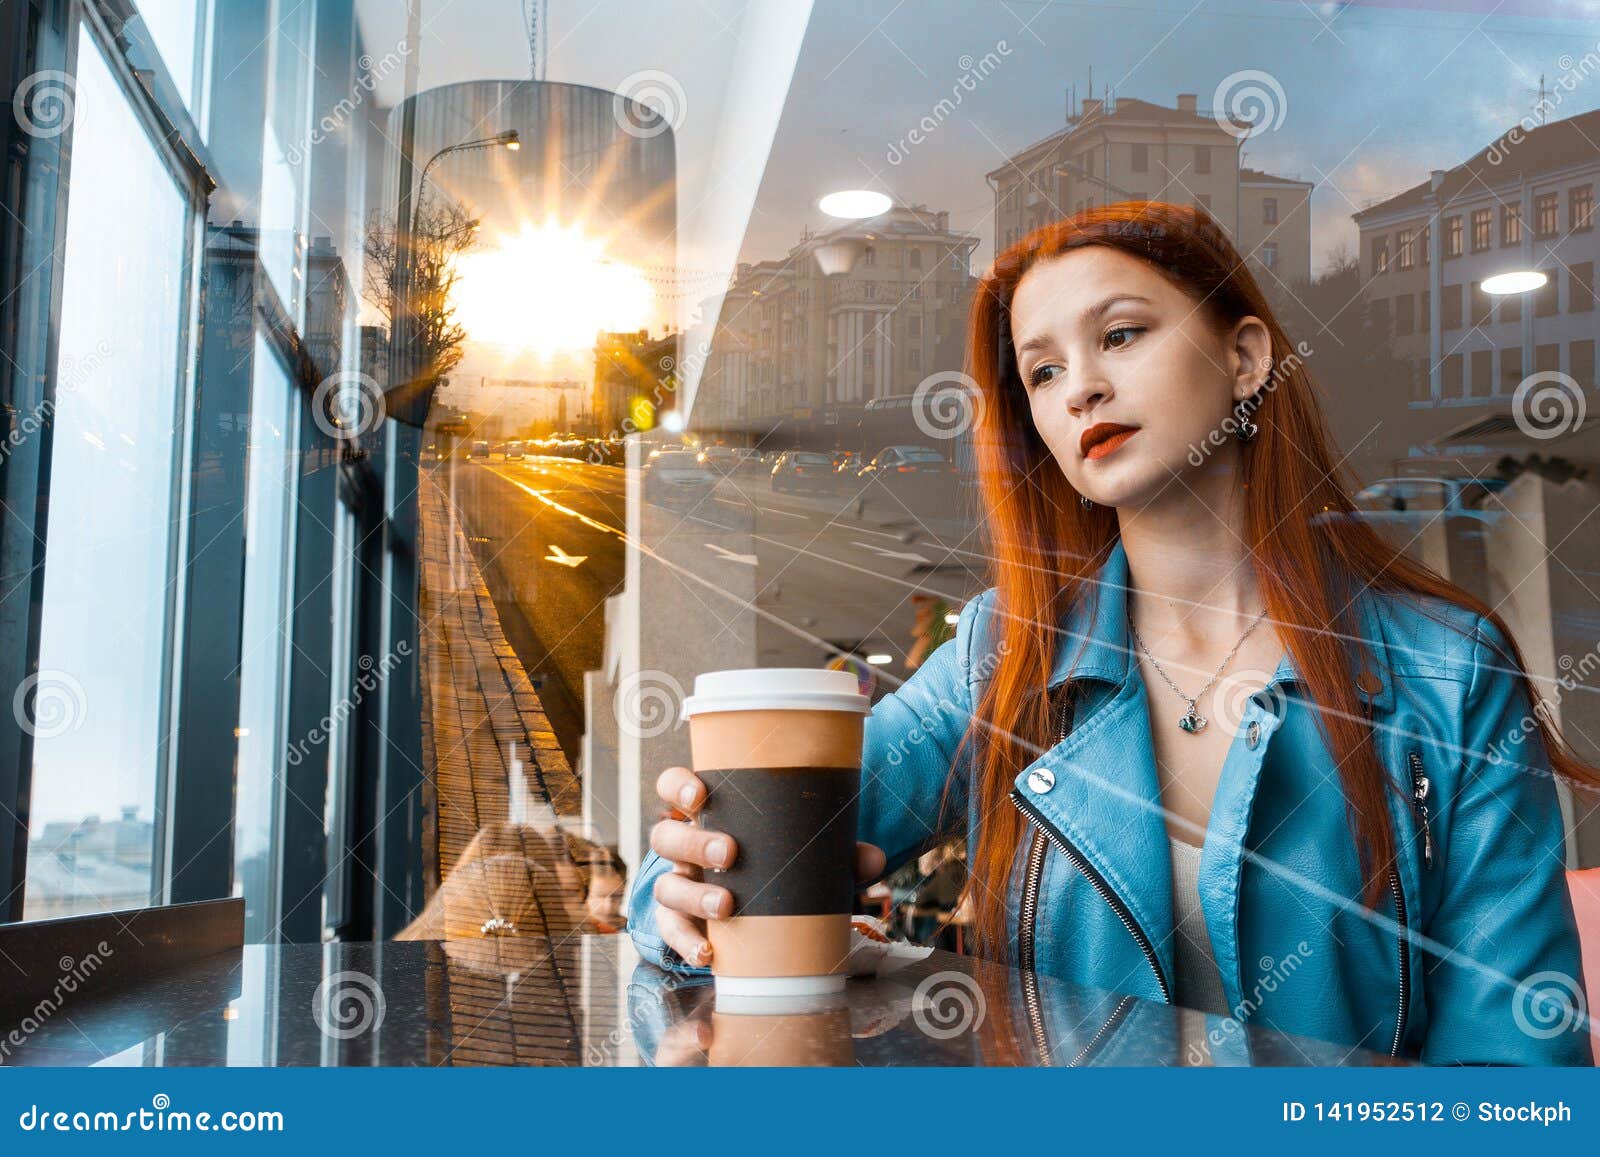 Beautiful Romantic Girl Drinks Coffee In A Cafe Redhaired Woman